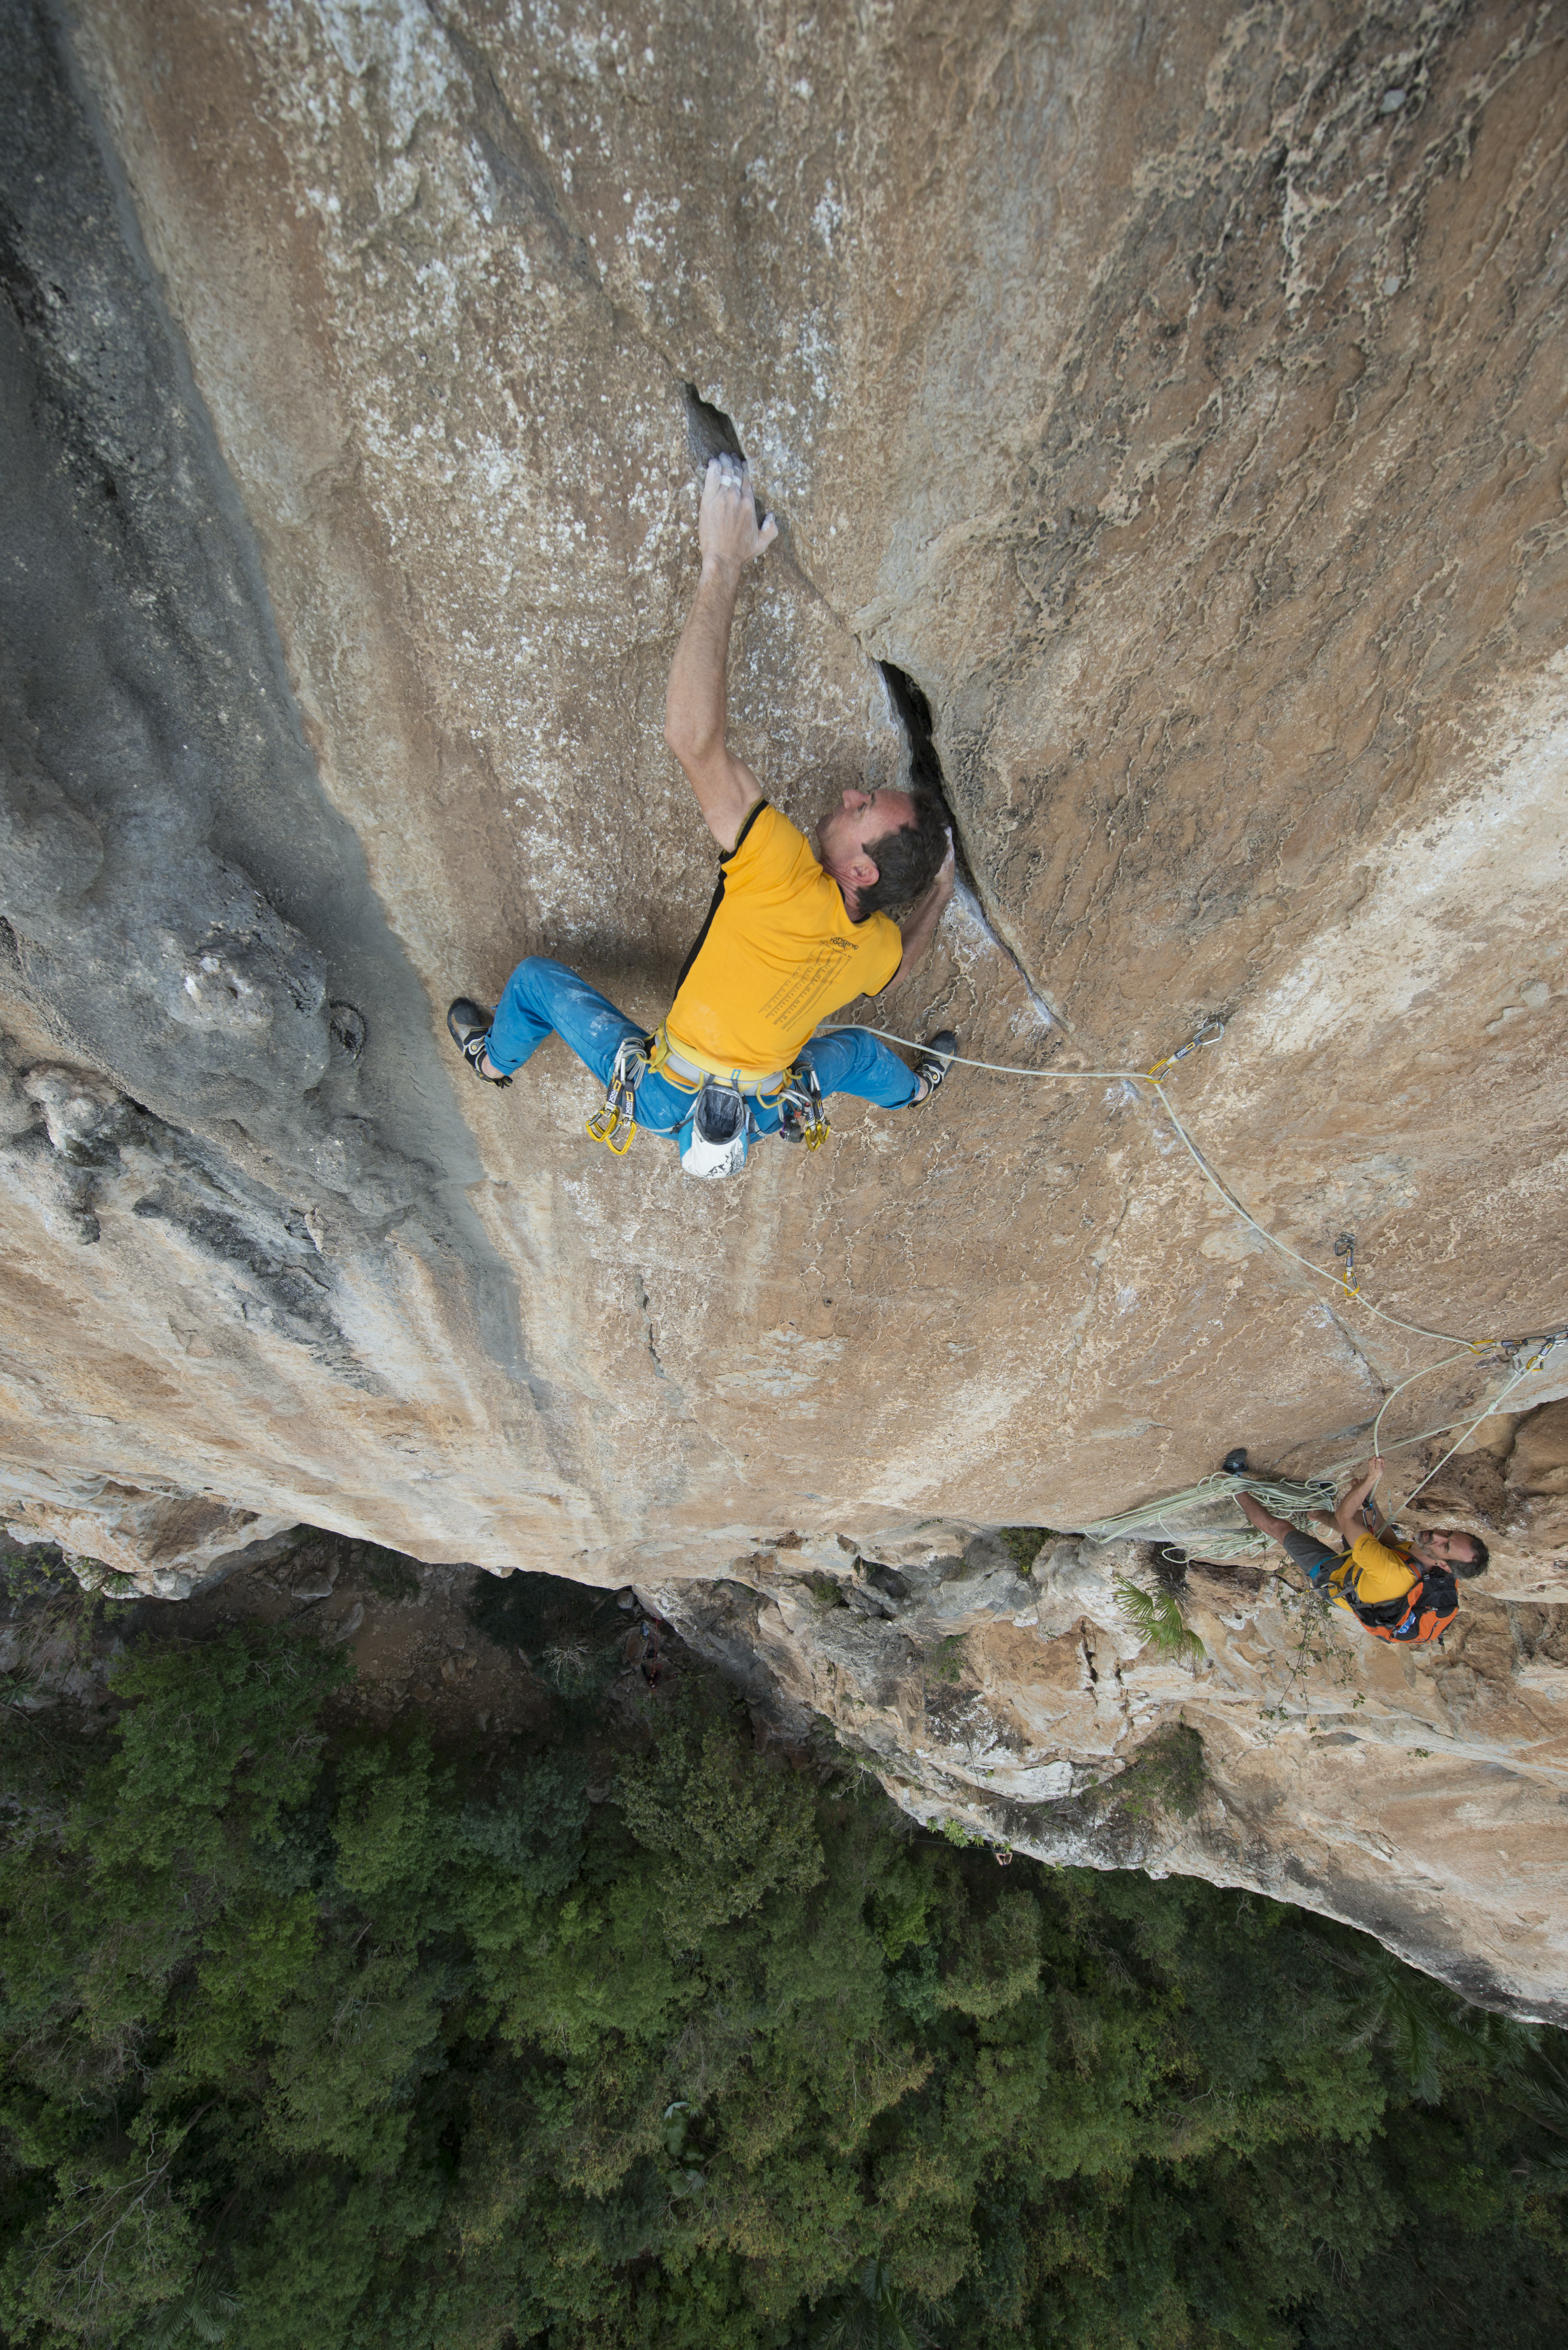 Two climbers on a multi-pitch climb in Vinales, Cuba